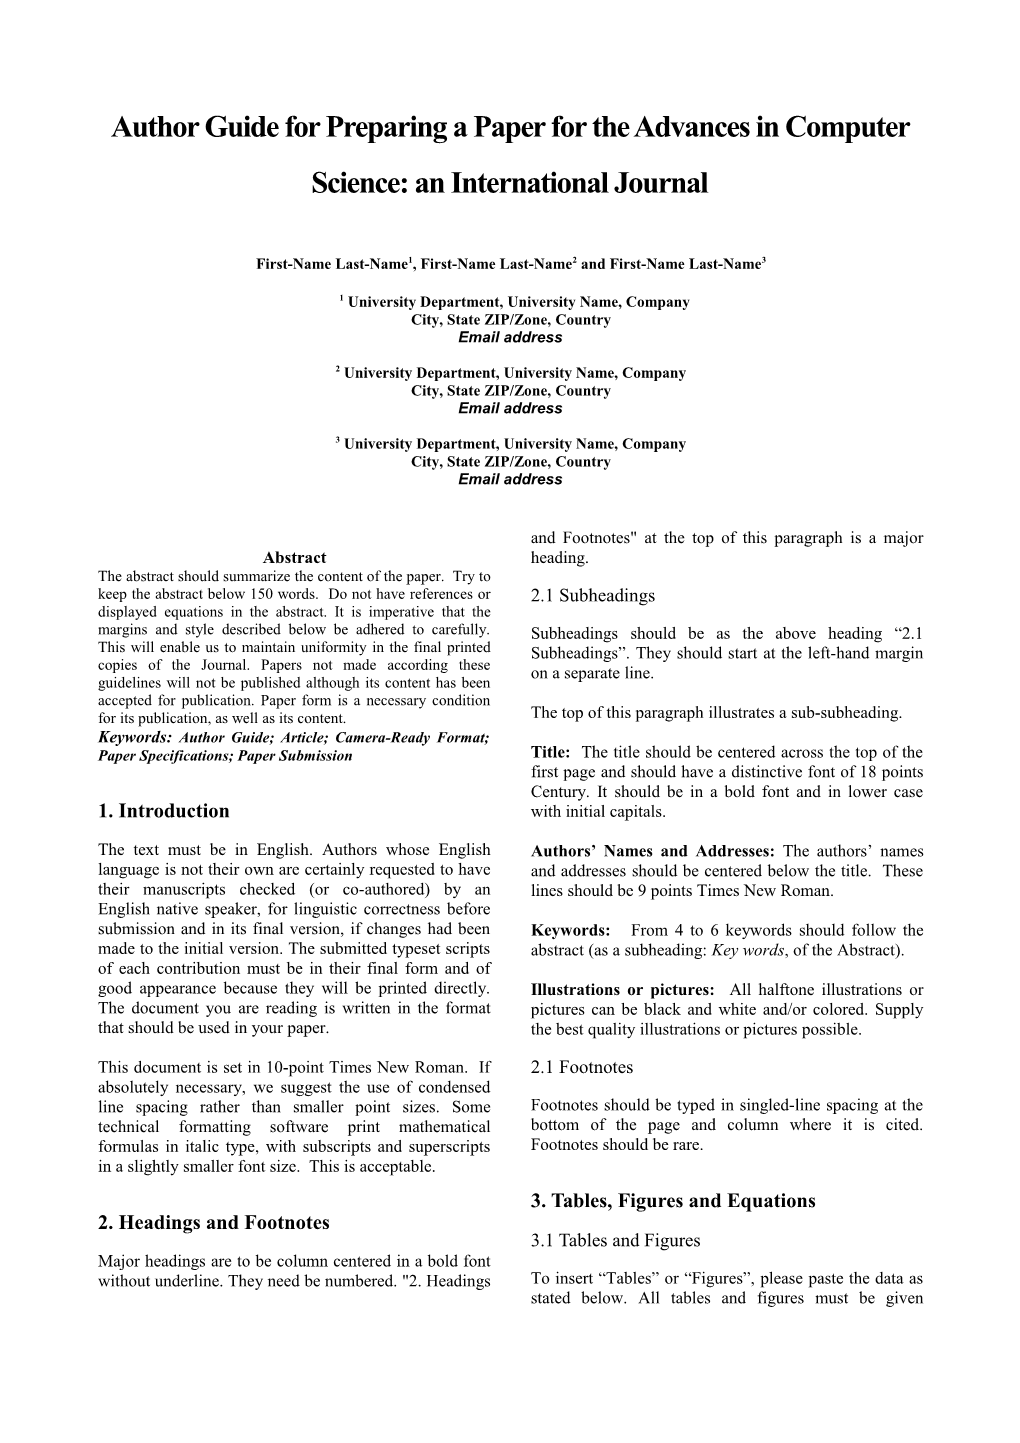 Author Guide for Preparing a Paper for the Advances in Computer Science: an International